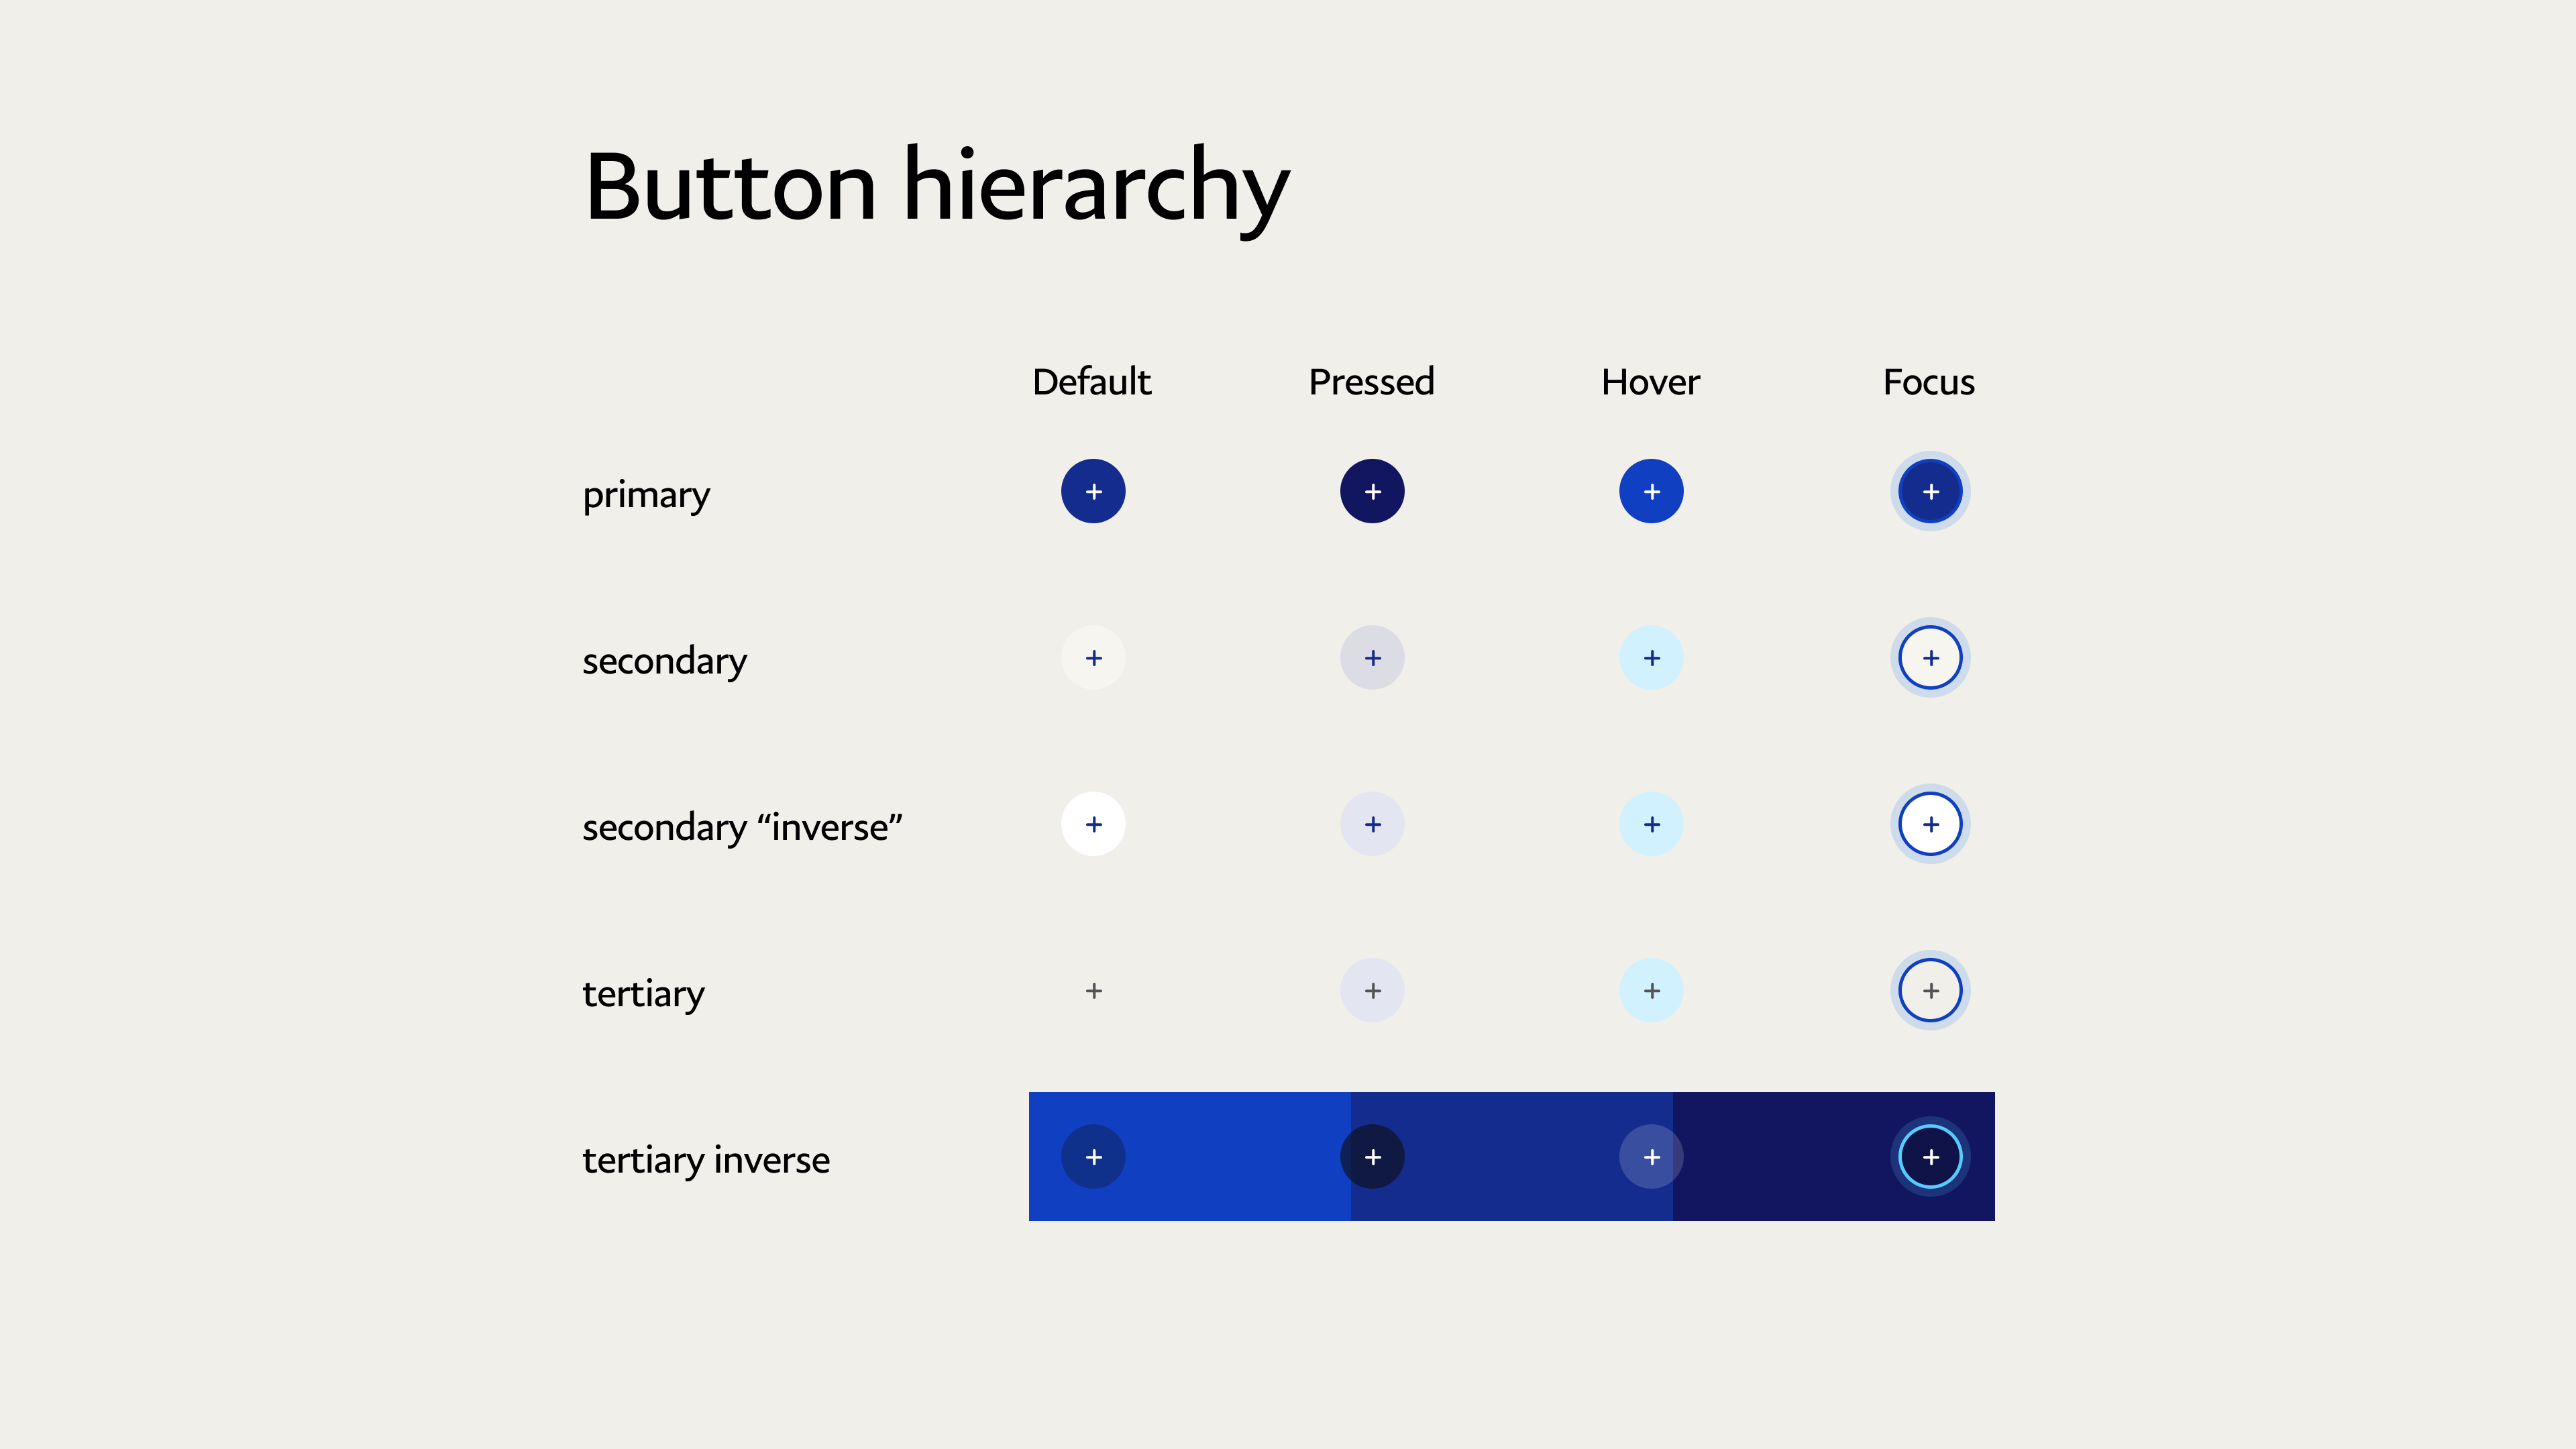 PPUI's 2.0 icon buttons broken down into primary, secondary, secondary "inverse," tertiary, and tertiary inverse. Each style has default, pressed, hover, and focus state.